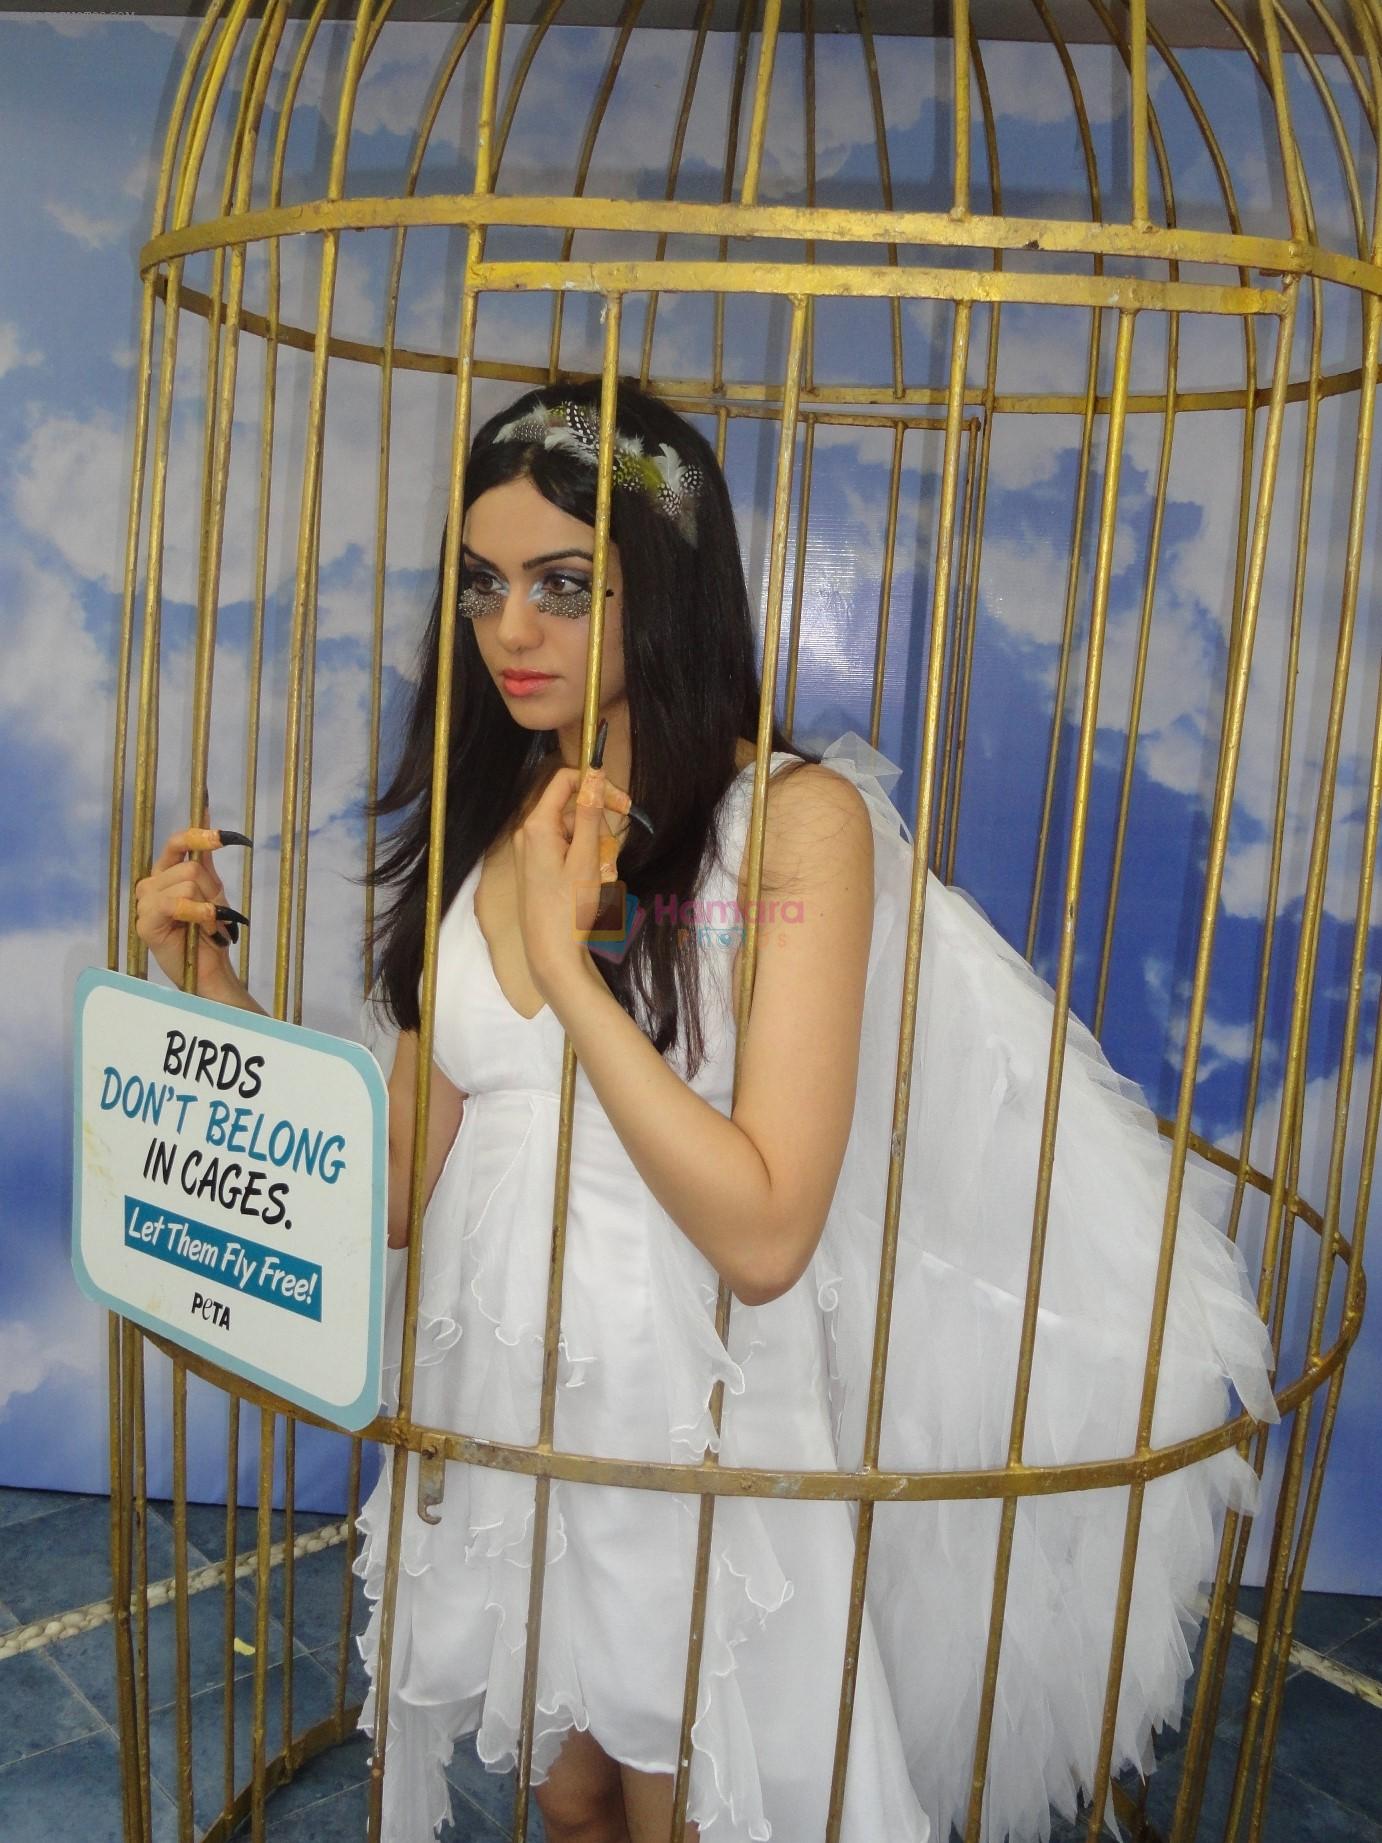 Adah Sharma Locks herself behind bars to speak up for caged birds on 11th June 2013